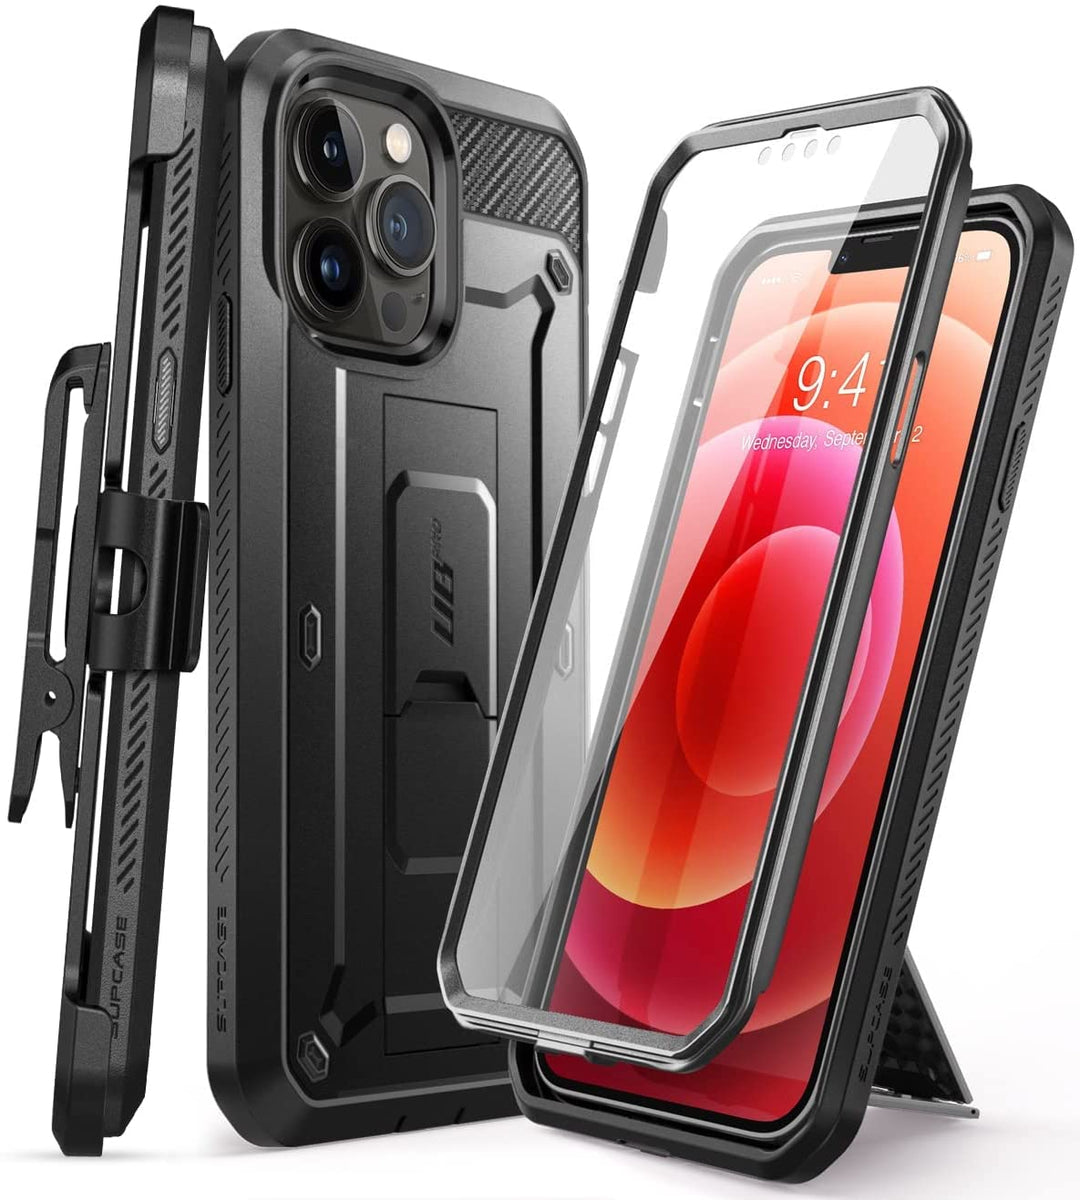 Supcase Beetle Pro Case for iPhone 13 Pro (2021 Release) 6.1 Inch, Built-In Screen Protector Black - 3alababak